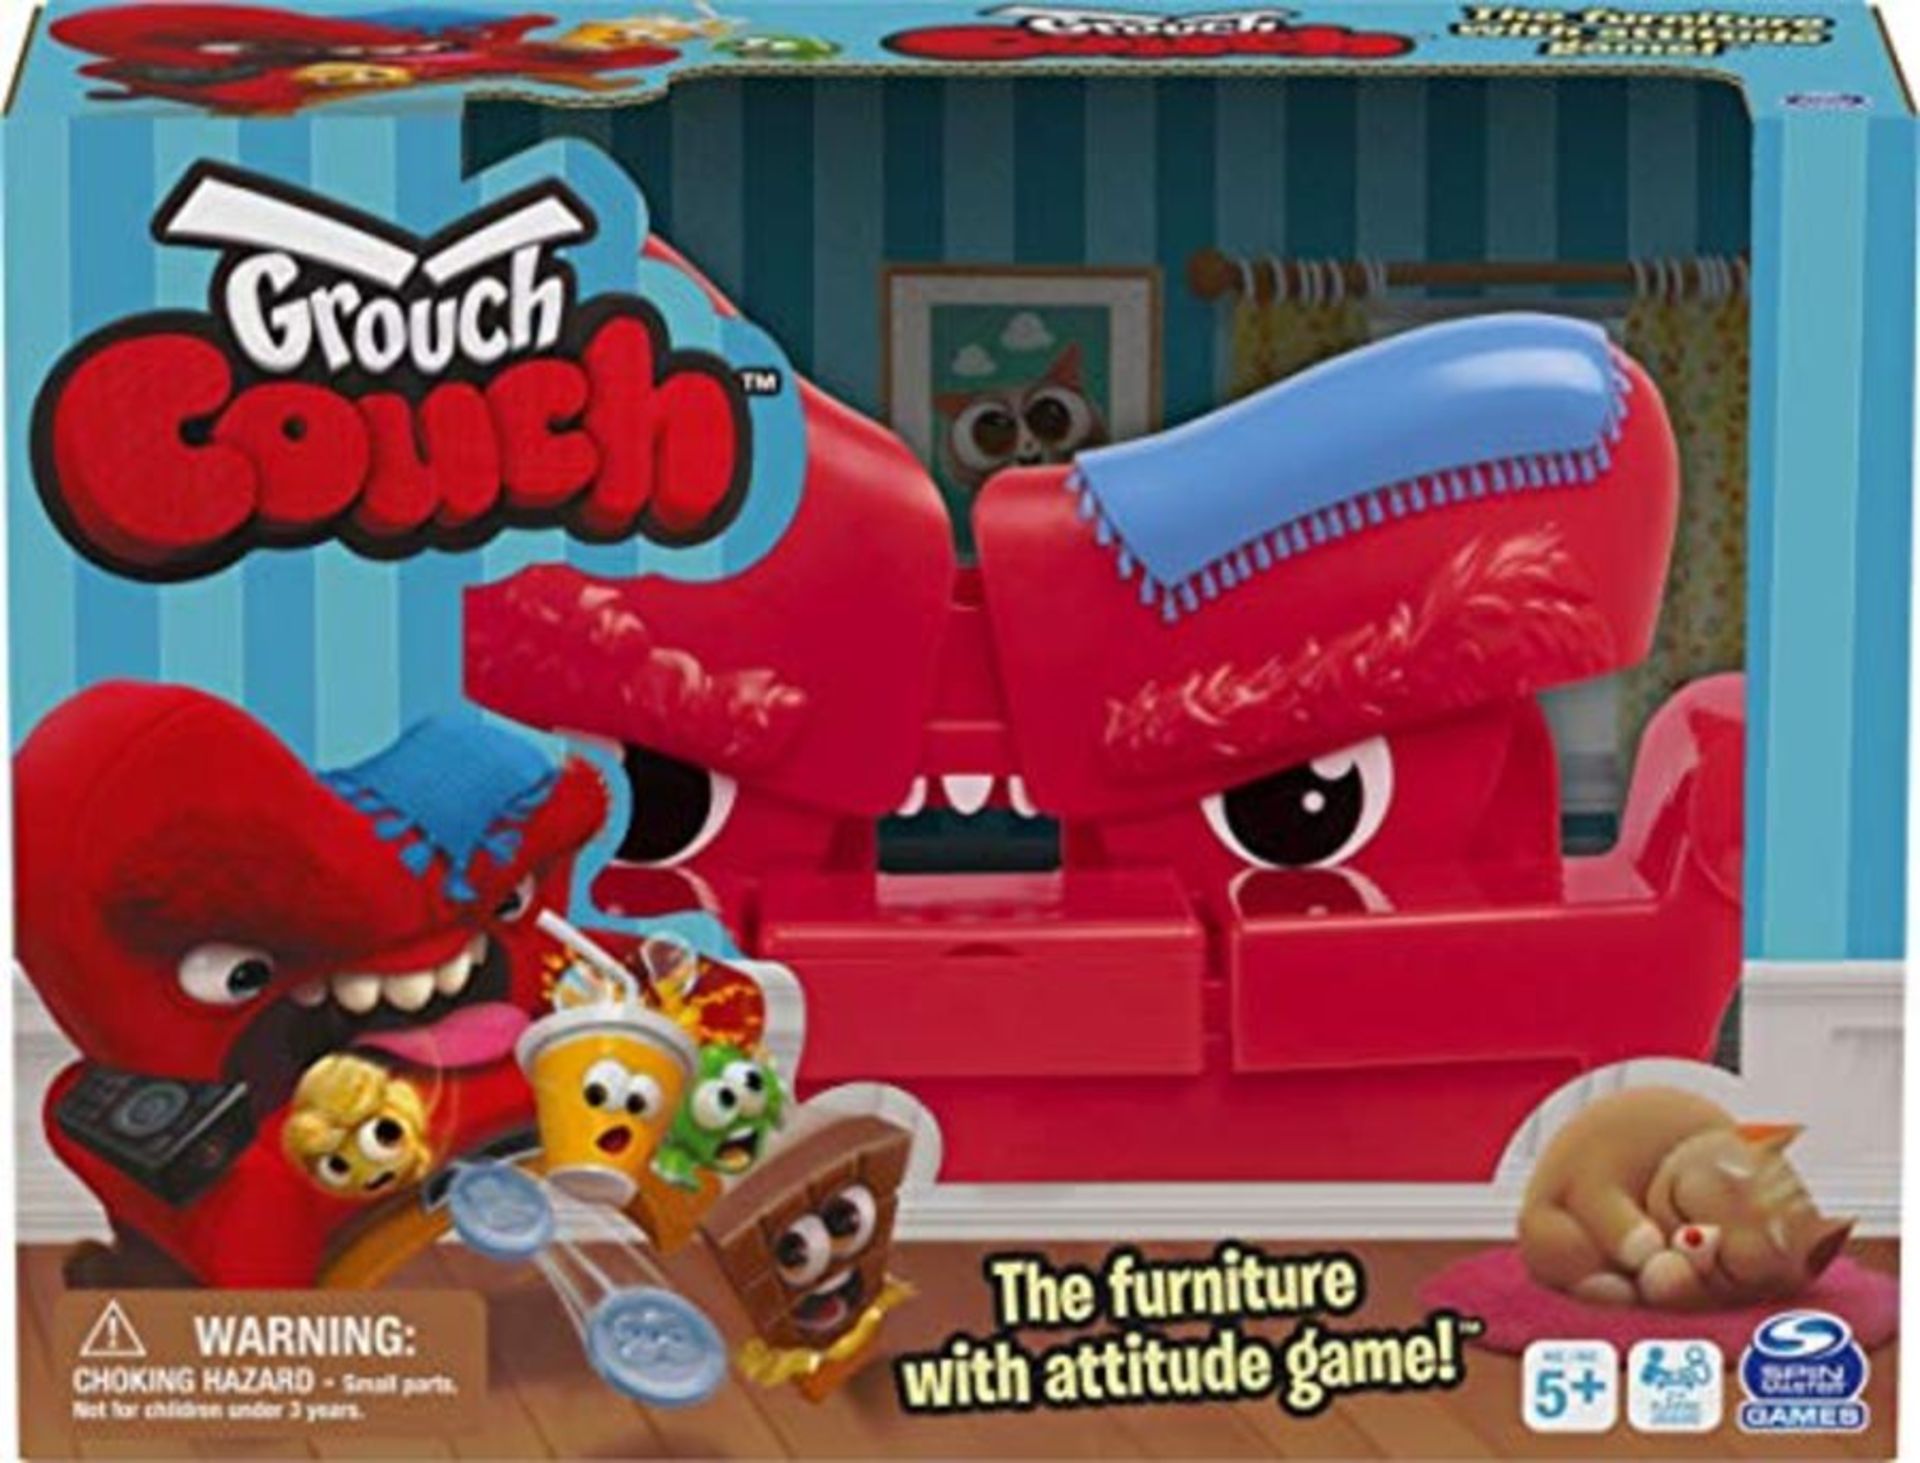 Spin Master Games Grouch Couch, Furniture with Attitude Game for Kids and Families